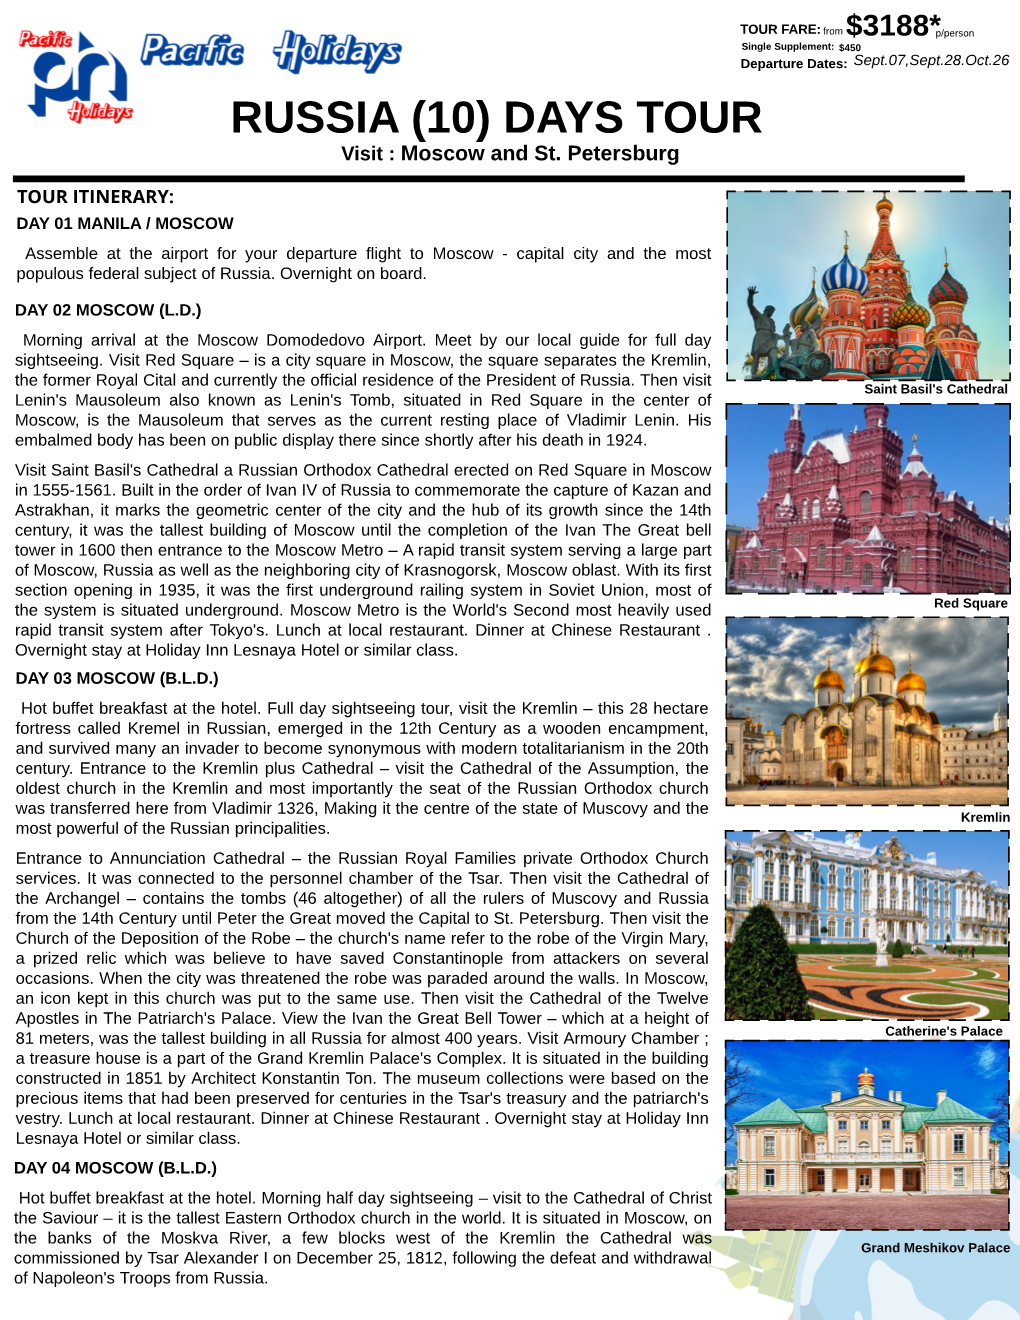 RUSSIA (10) DAYS TOUR Visit : Moscow and St